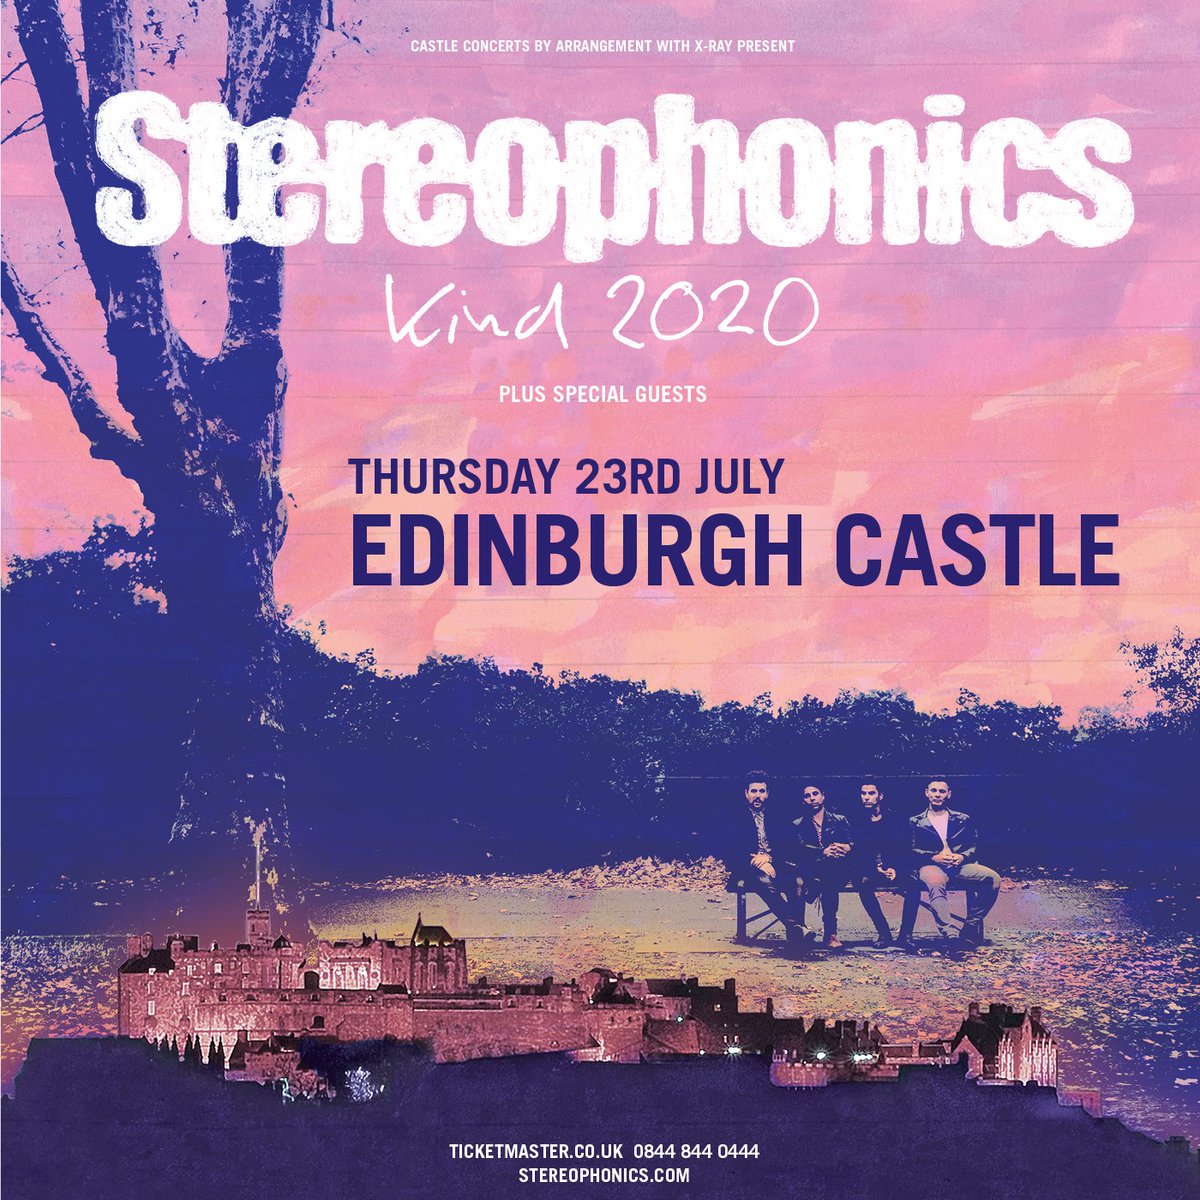 Stereophonics tickets Cost? 2022 UK Tour Announced!